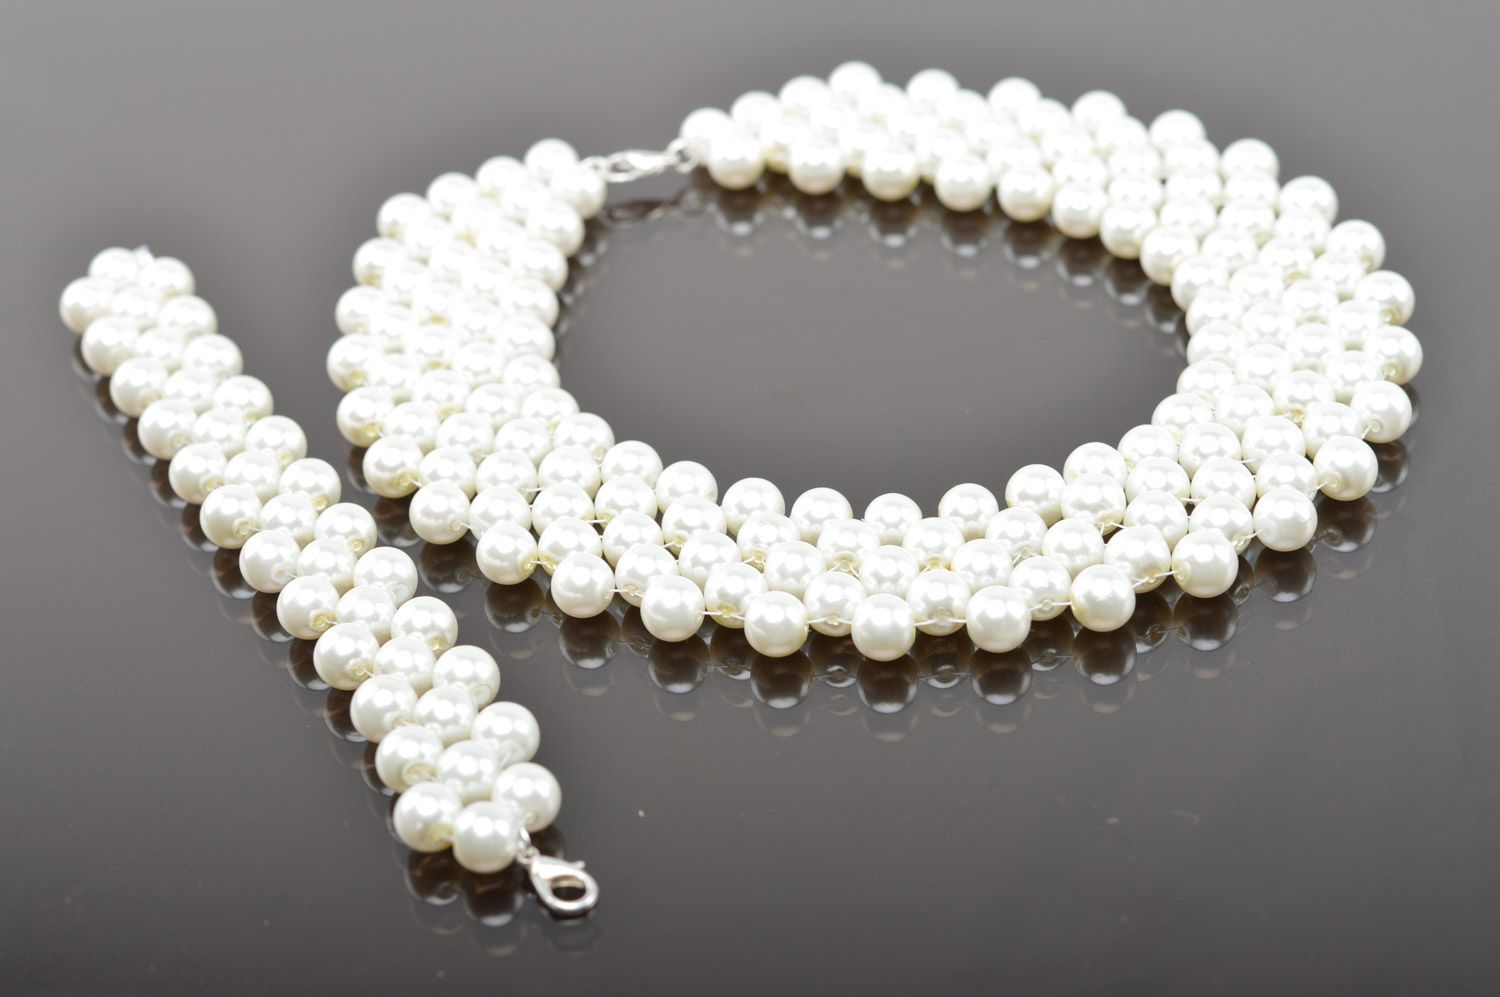 Handmade artificial pearl jewelry set two items wide necklace and bangle bracelet photo 2